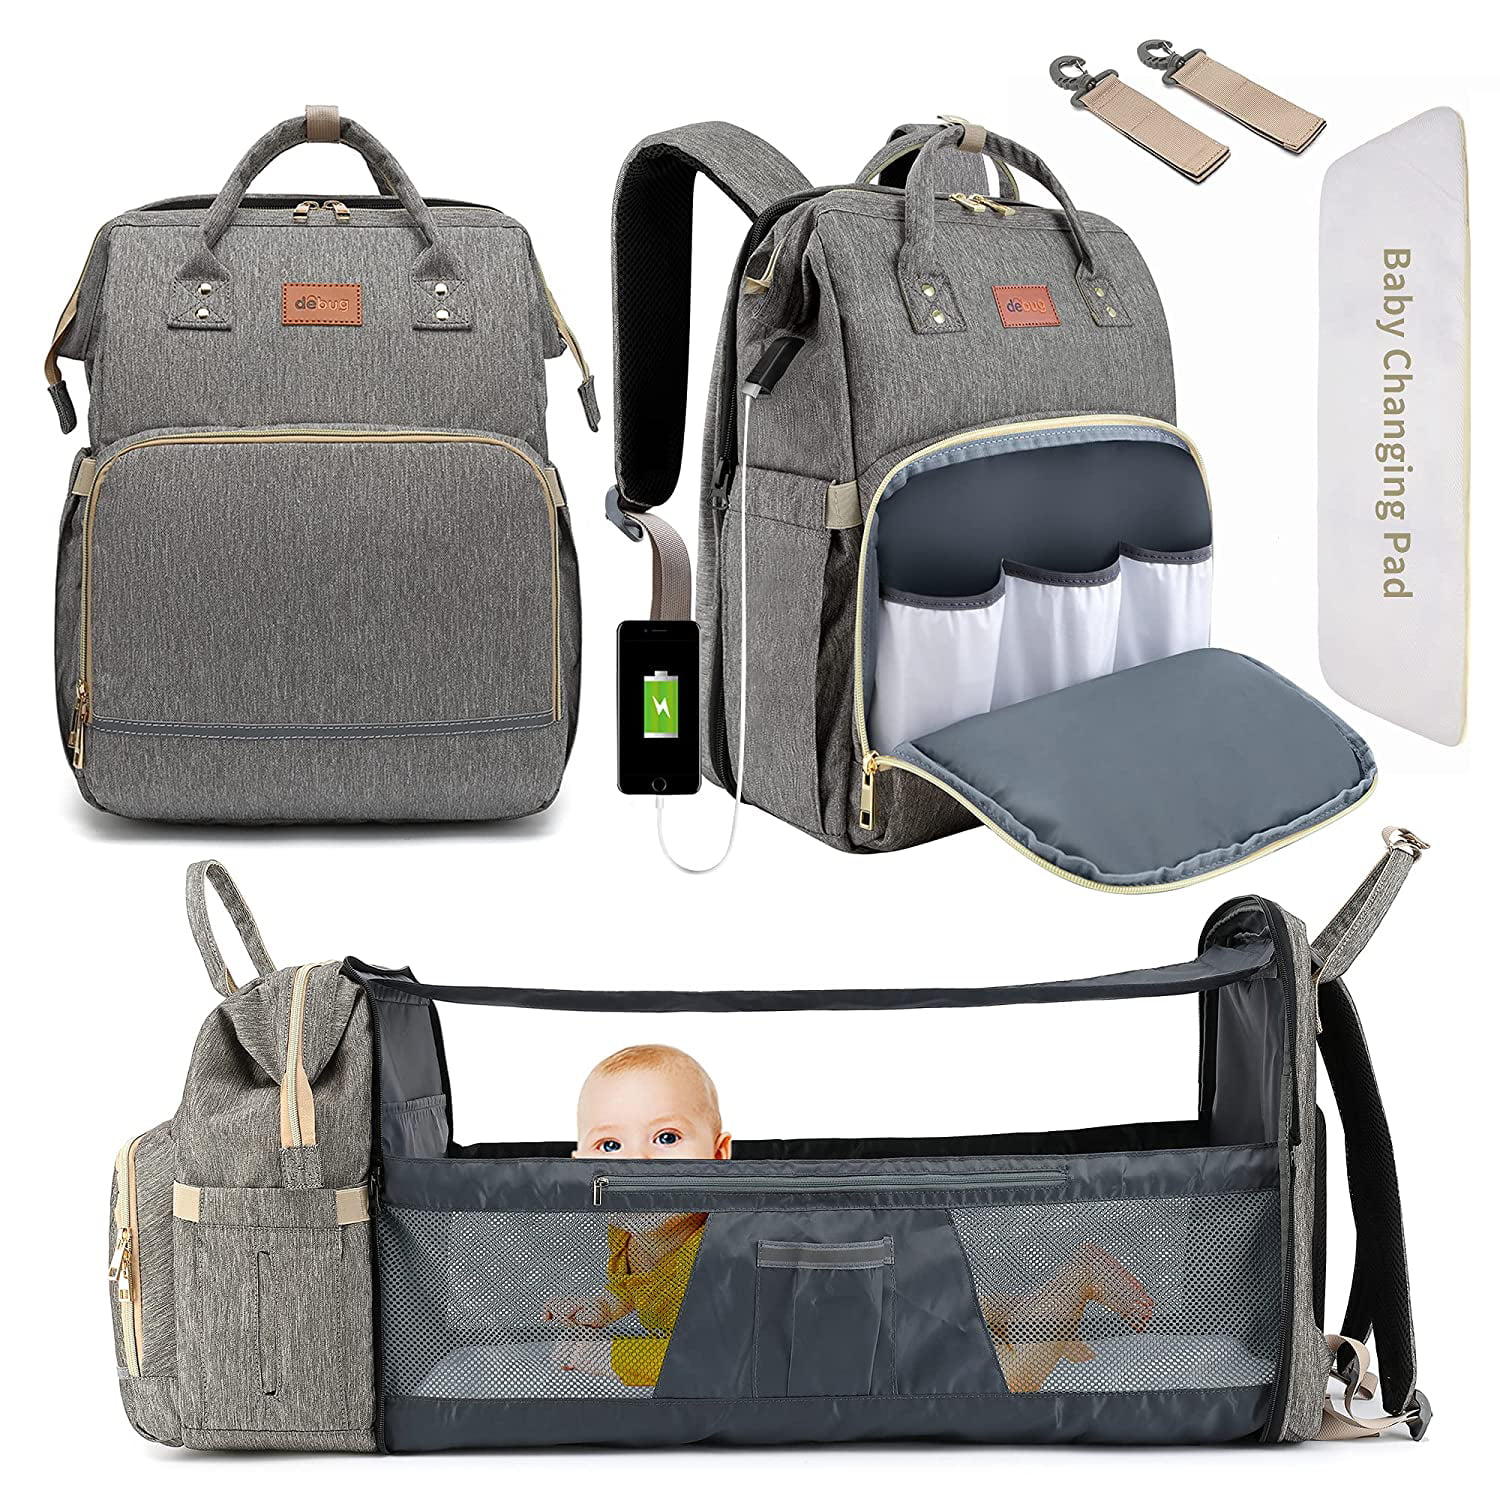 DEBUG Baby Bags for Boys Girls Stylish Diaper Bag with Stroller Straps and Insulated Pocket for Dad Mom Diaper Bag Backpack Grey Large Waterproof Travel Back Pack Diaper Bag with Changing Pad